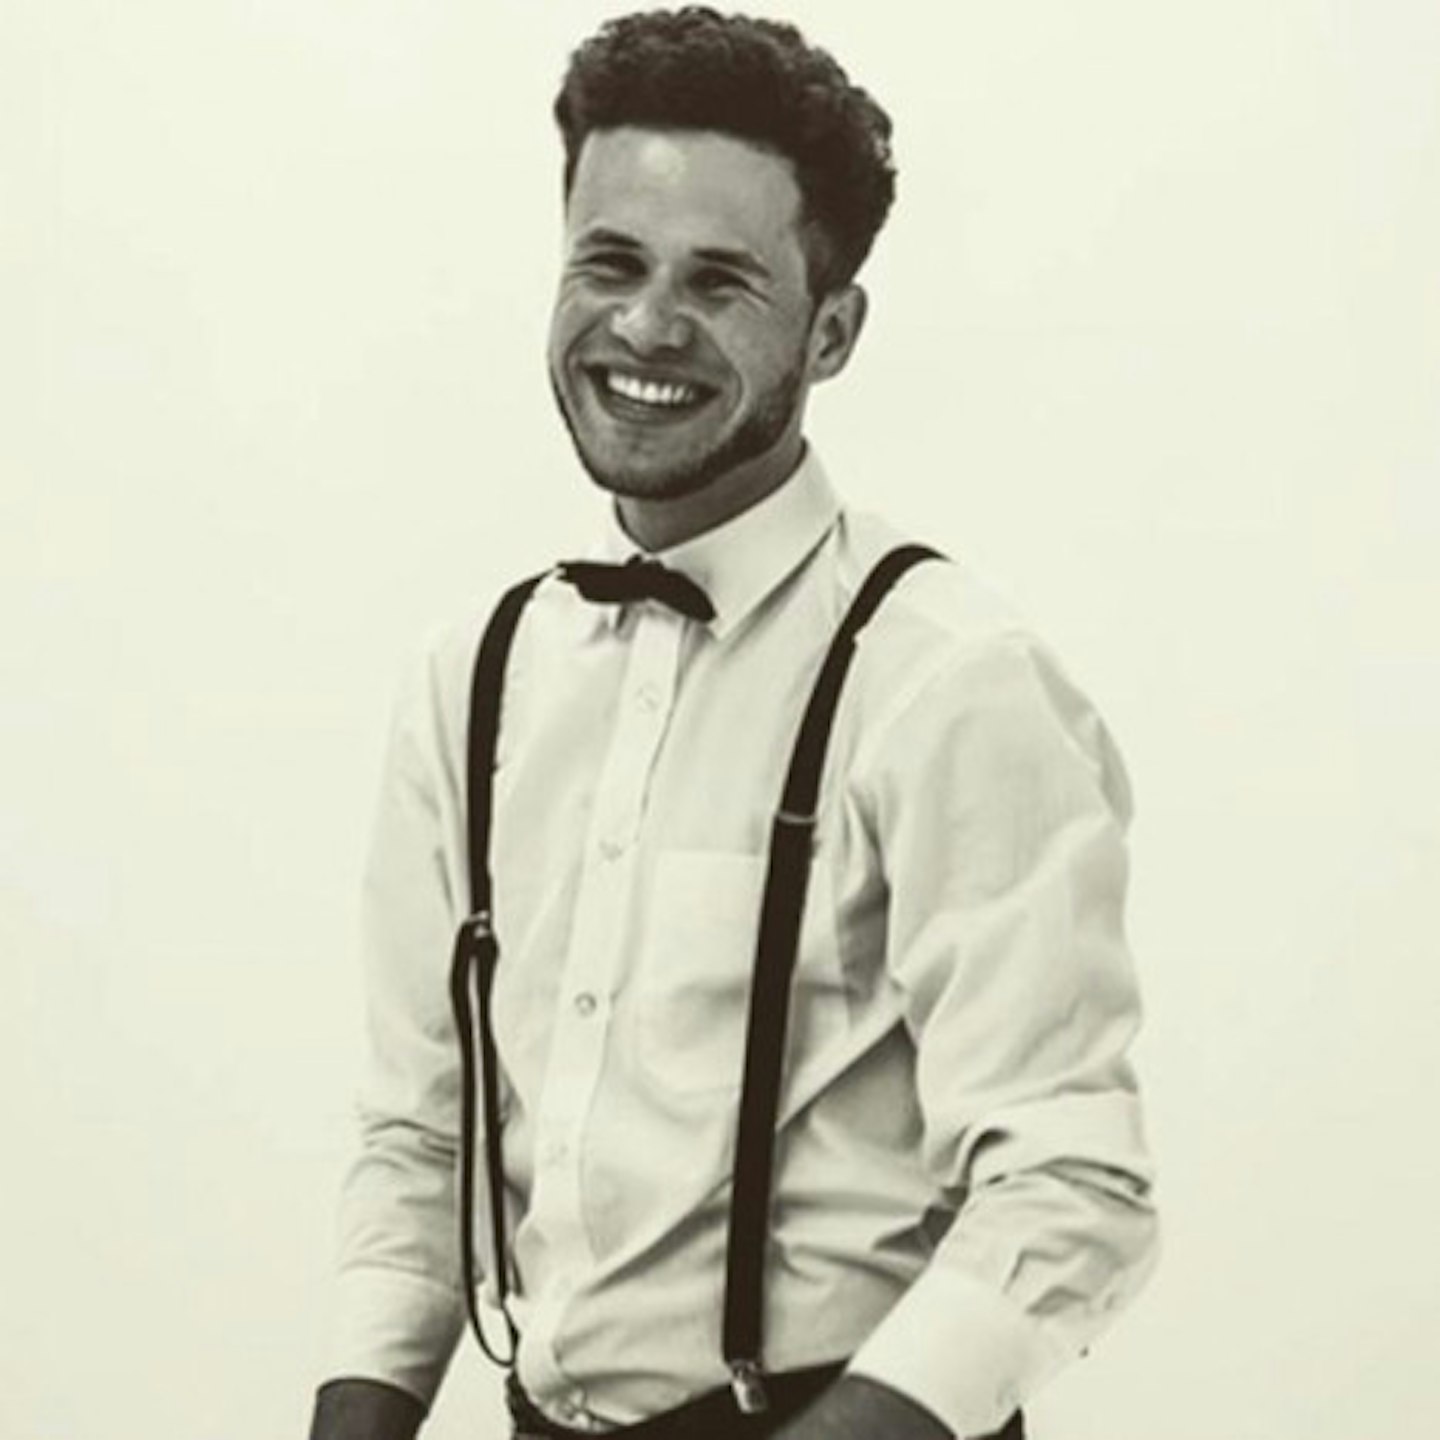 Jamie works as an Olly Murs tribute act... obviously